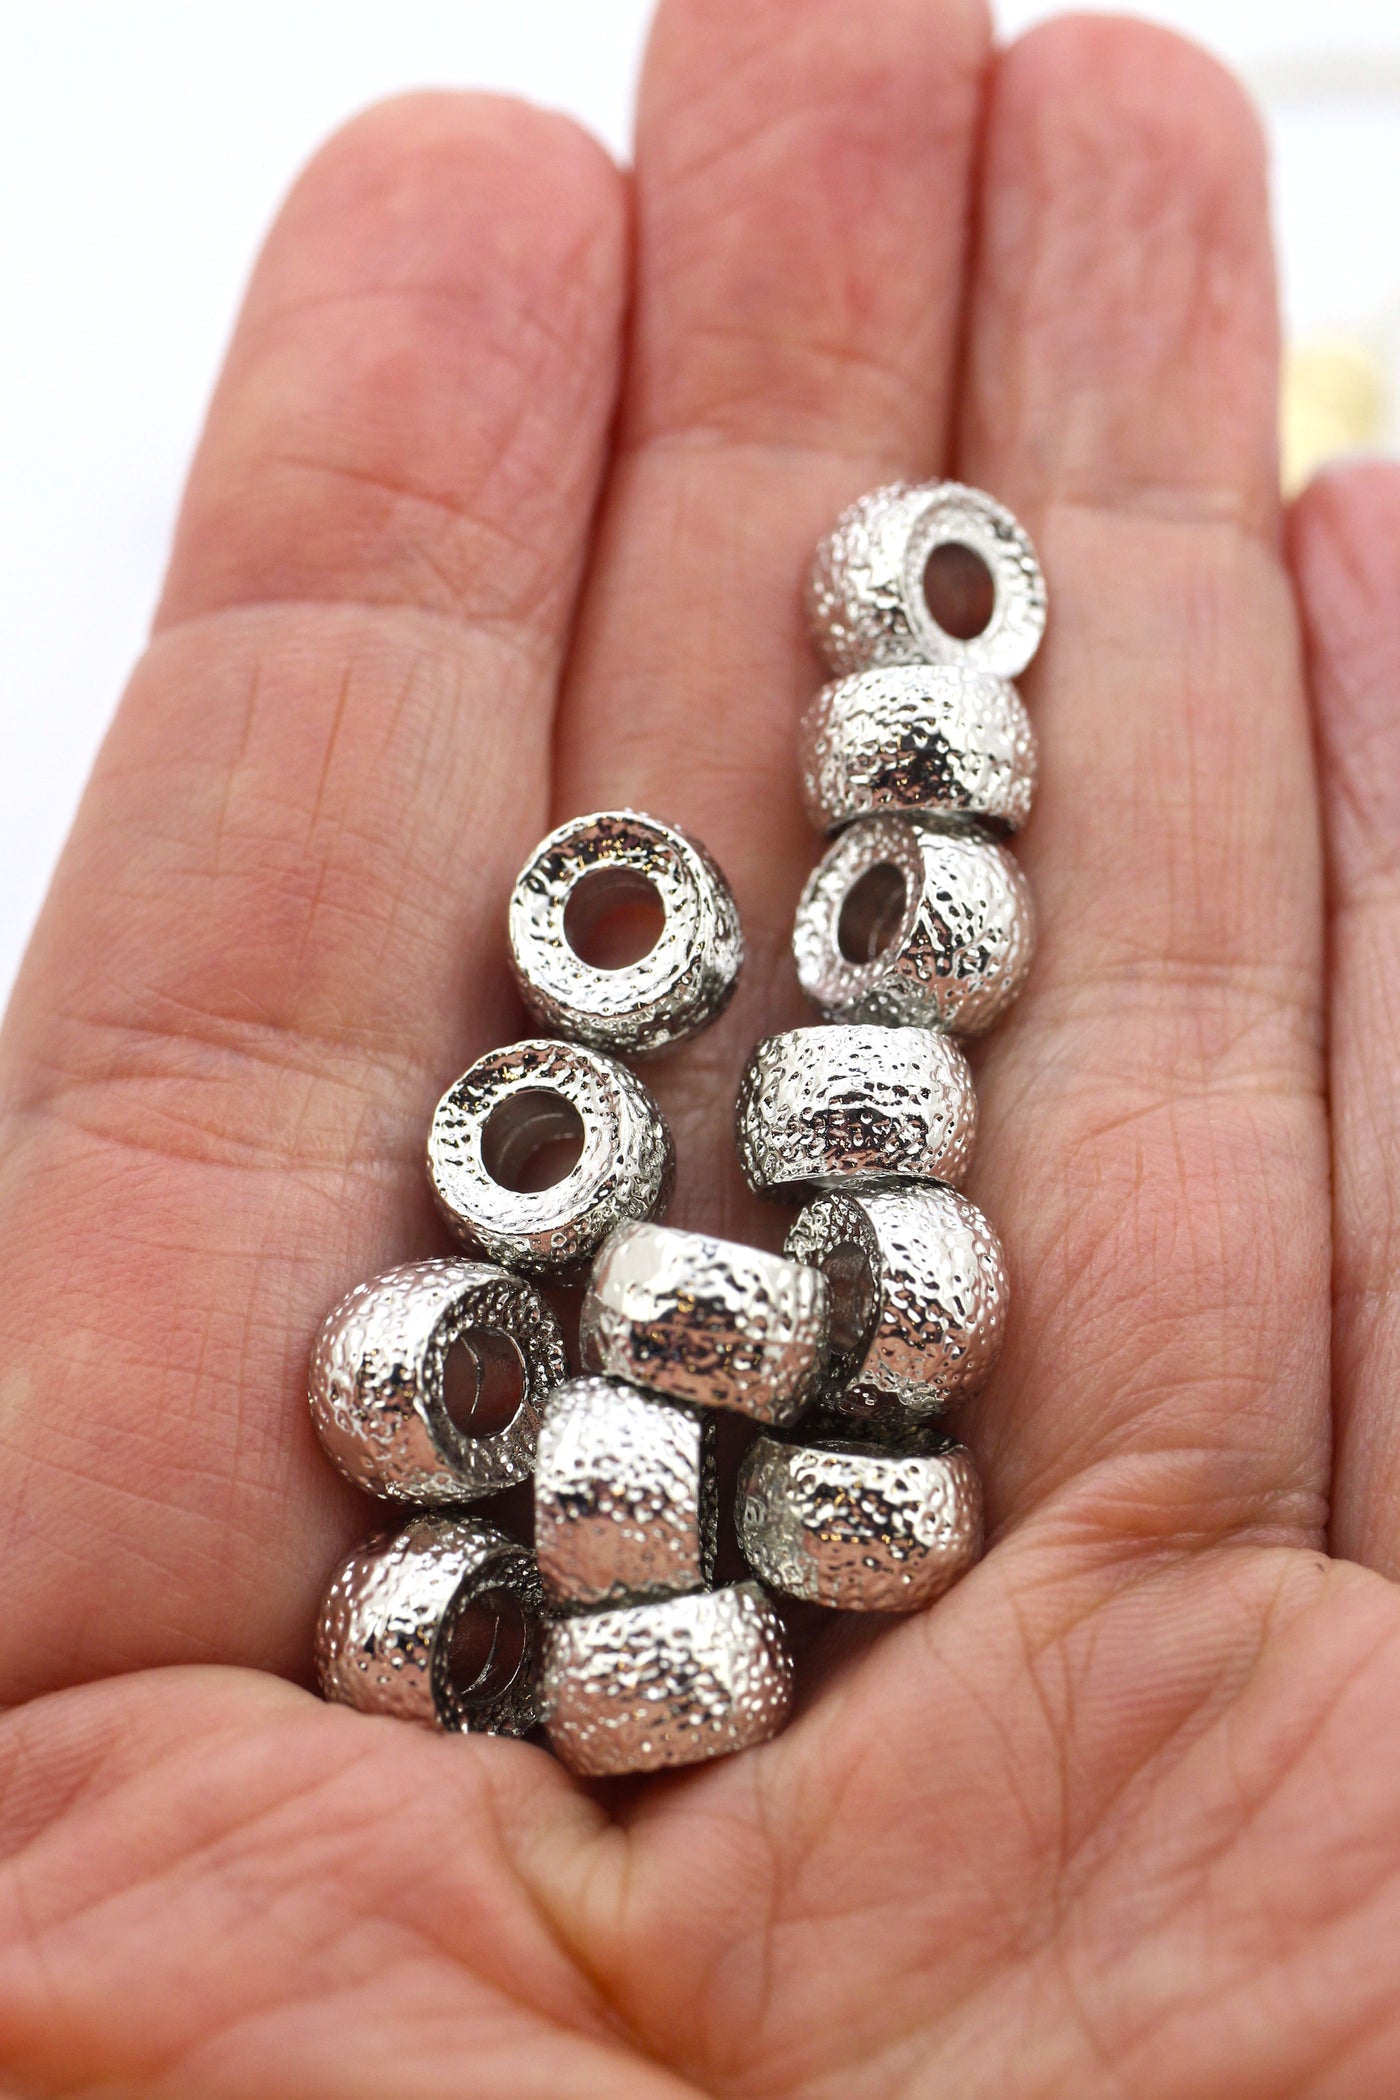 Textured Metal Pony Beads, Stardust Roller Beads, For Tie-On Bracelets